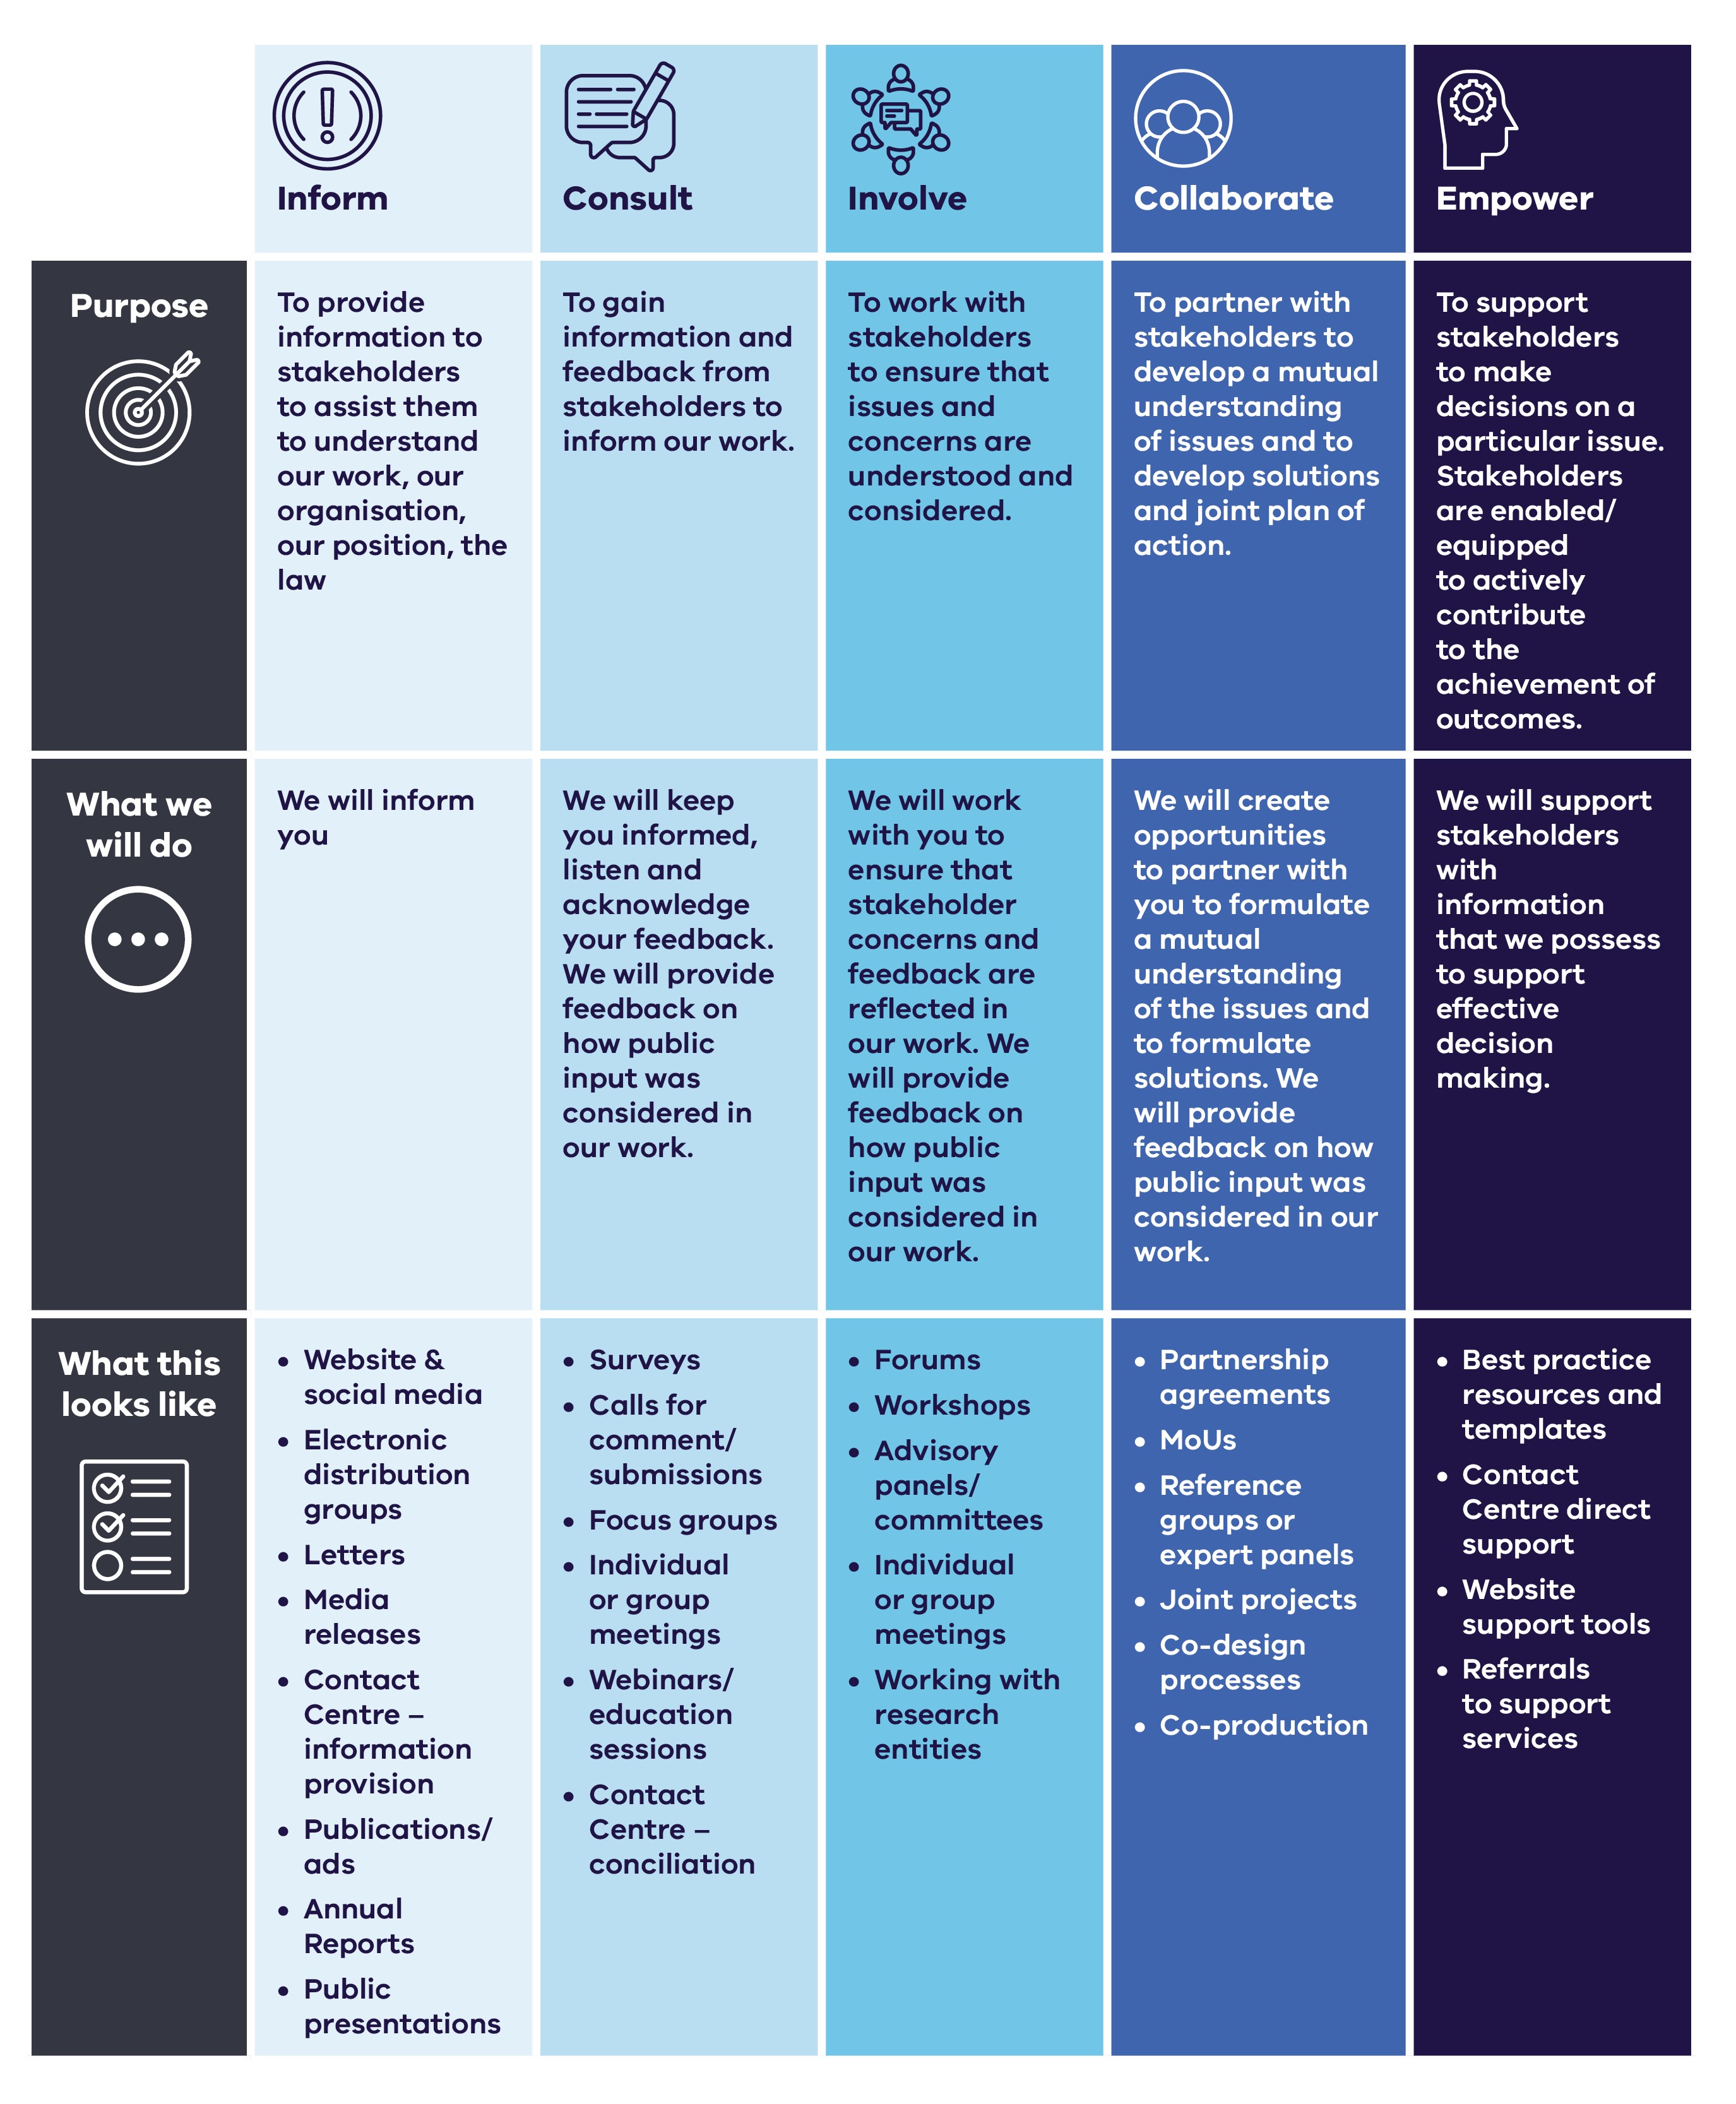 Consumer Affairs Victoria's stakeholder engagement spectrum table.